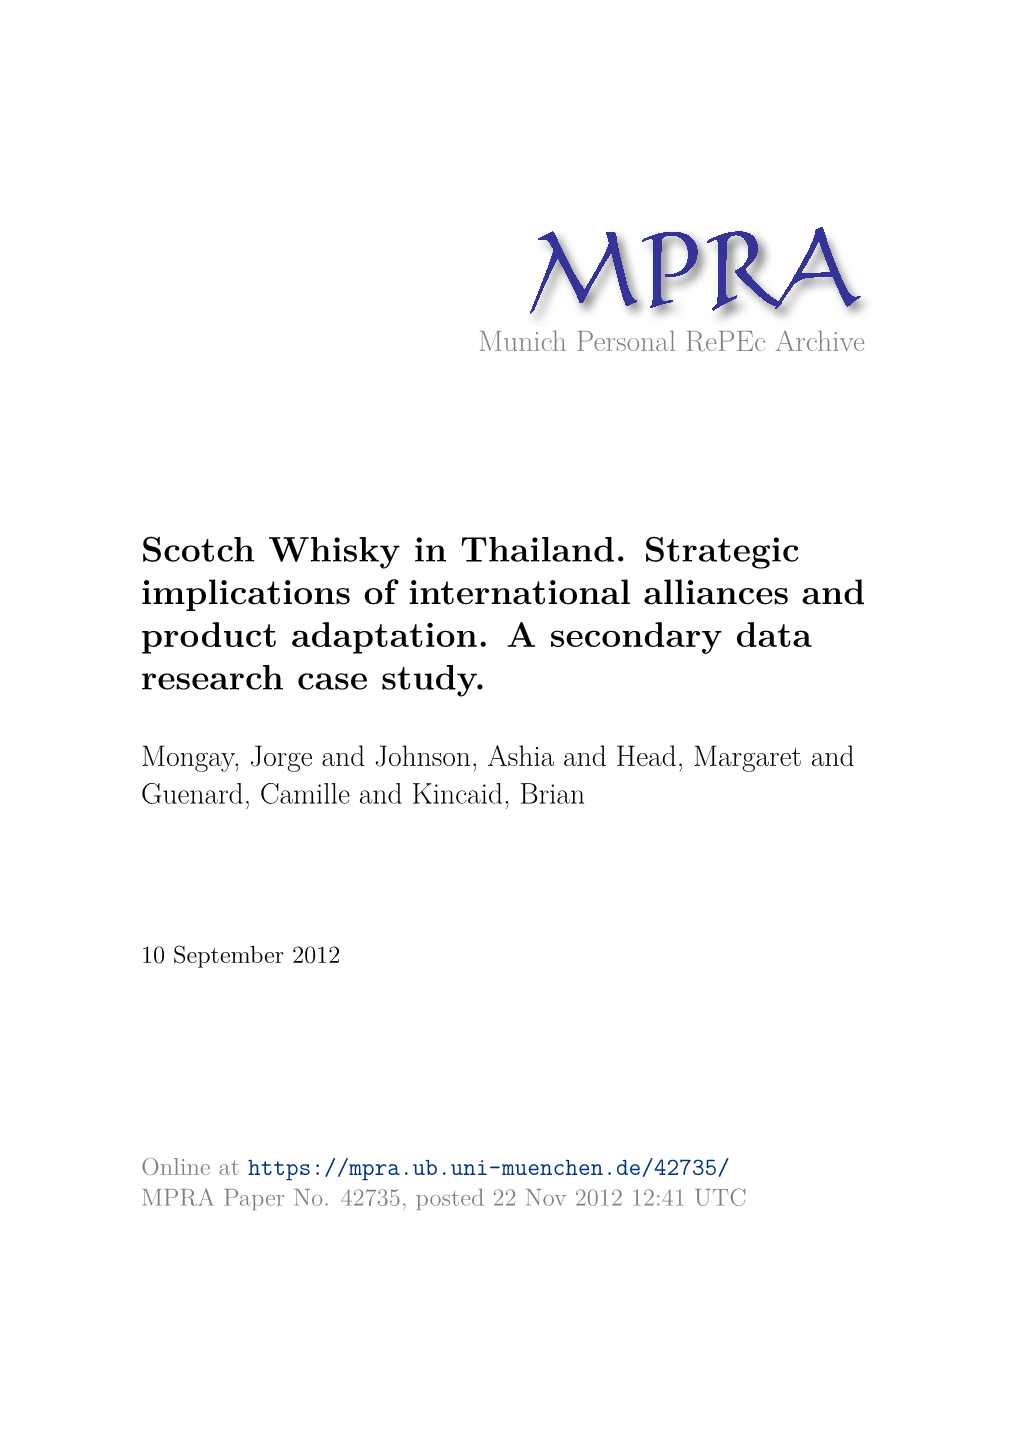 Scotch Whisky in Thailand. Strategic Implications of International Alliances and Product Adaptation